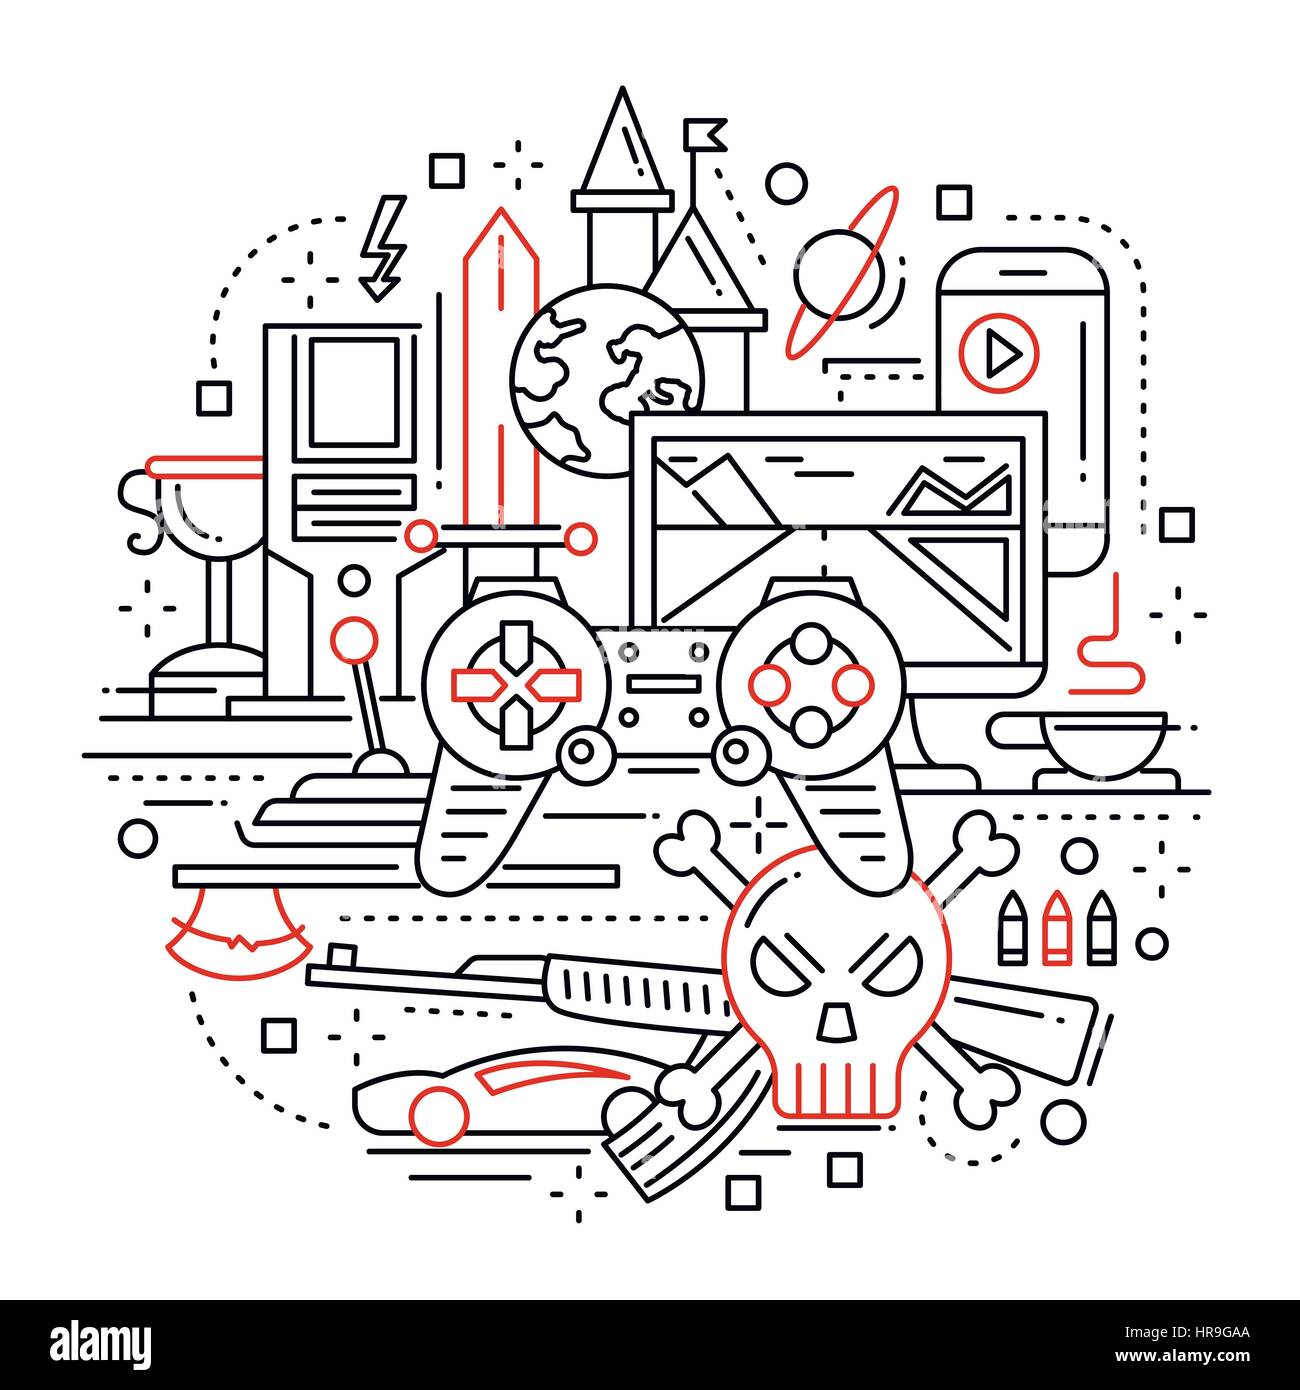 Video Gaming - line design composition Stock Vector